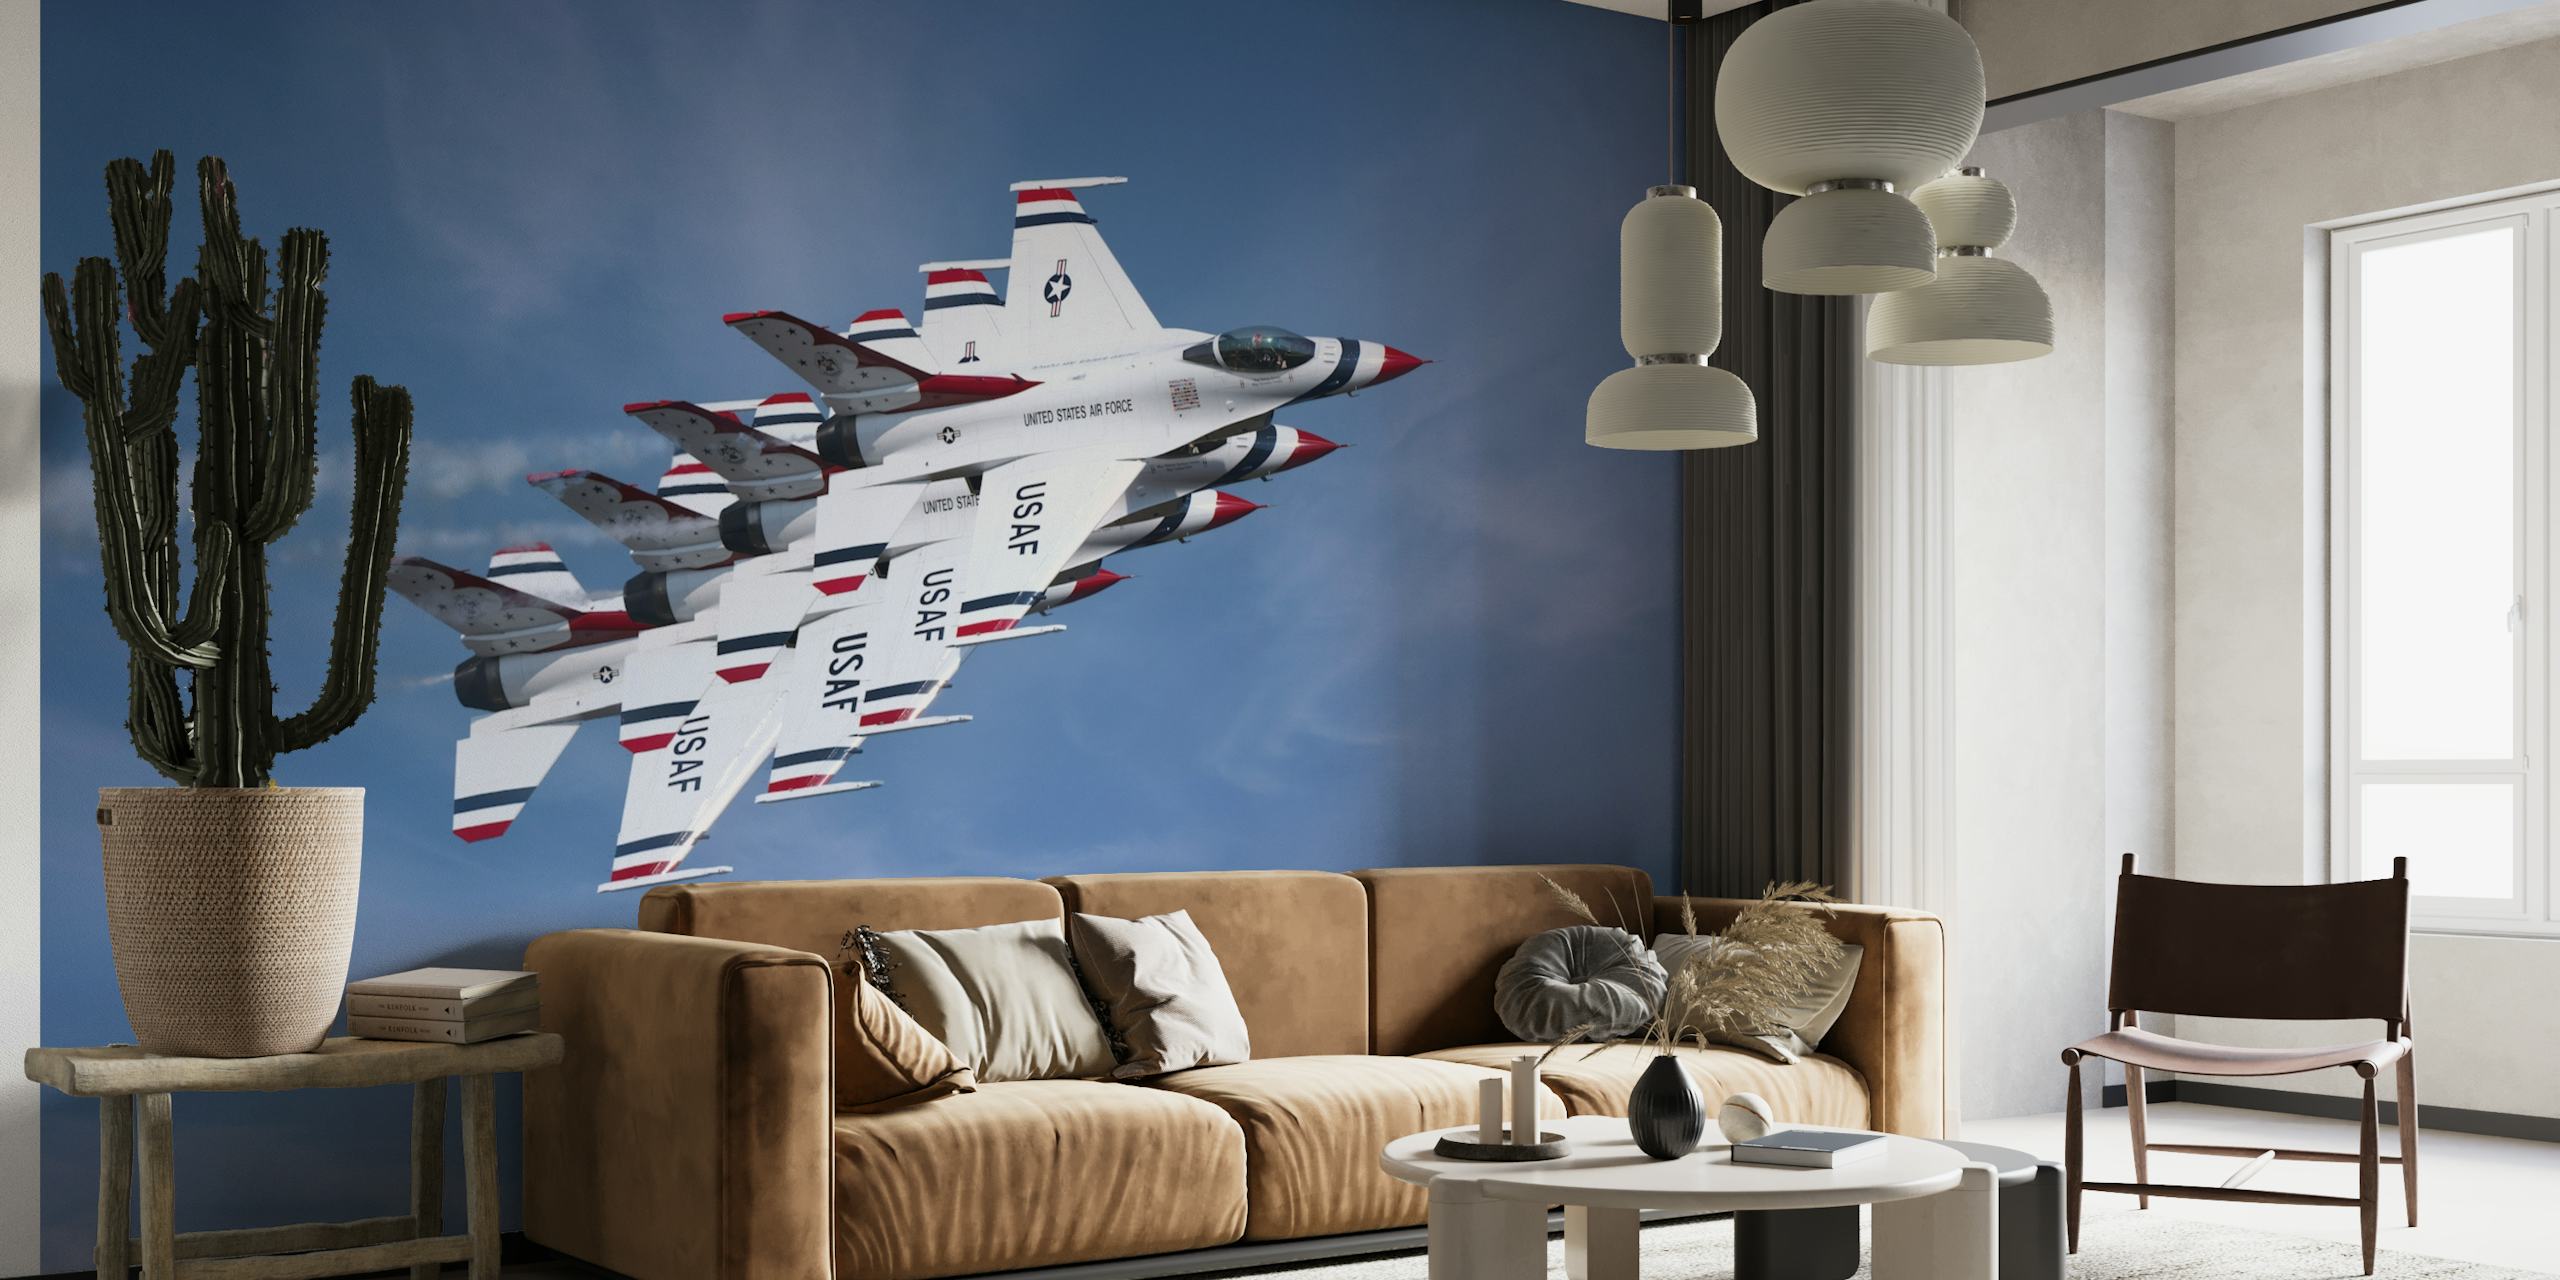 Four fighter jets flying in tight formation wall mural